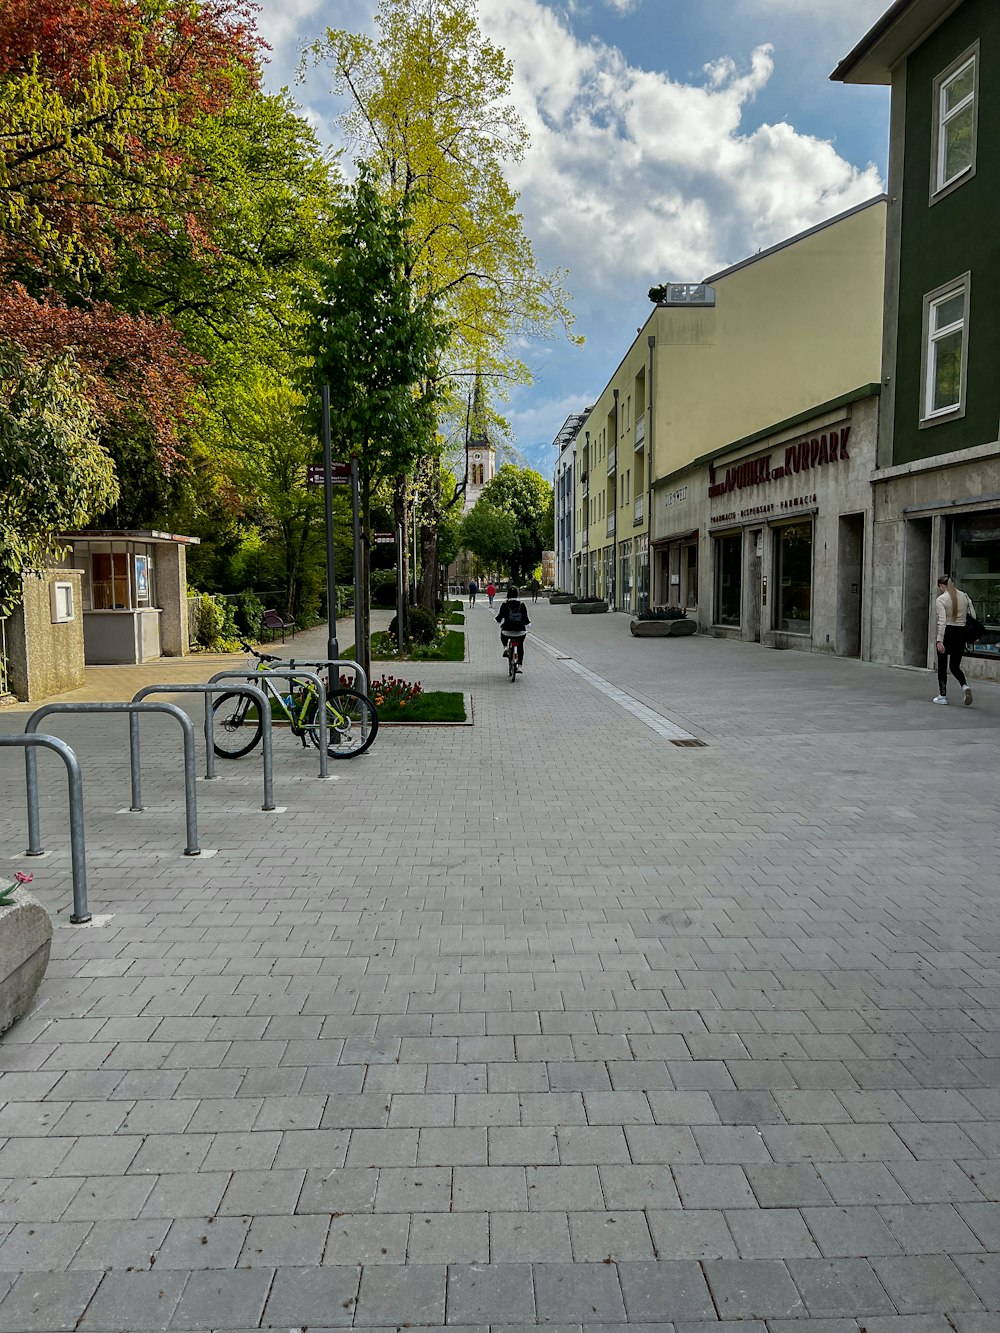 a person riding a bicycle on a street with trees on either side